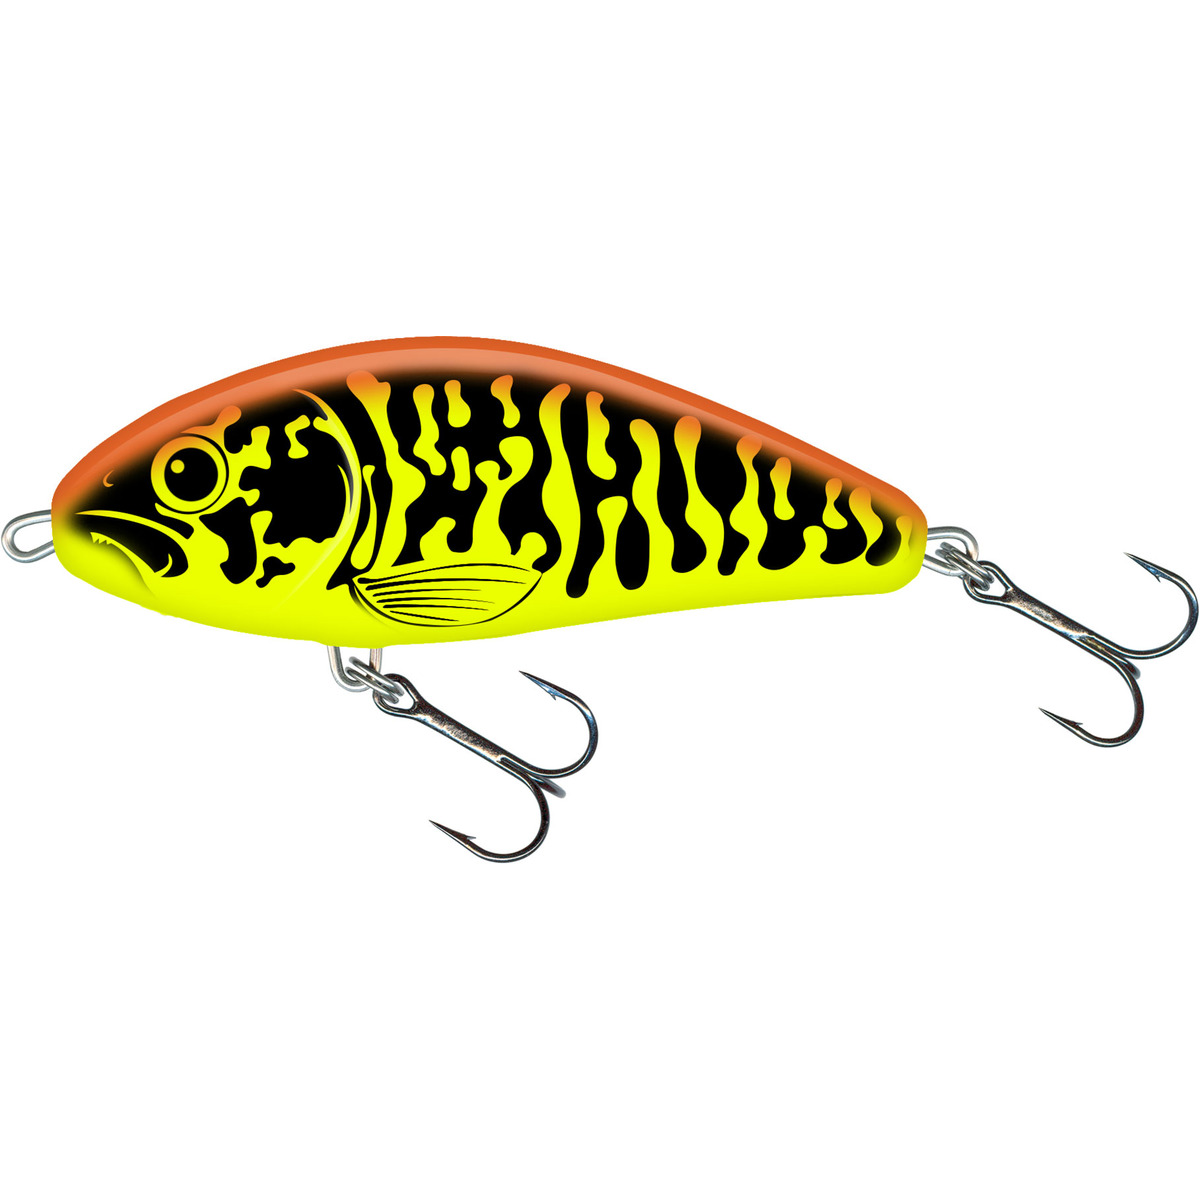 Salmo Fatso 14 Cm Floating Limited Edition Colours - Bright Pike